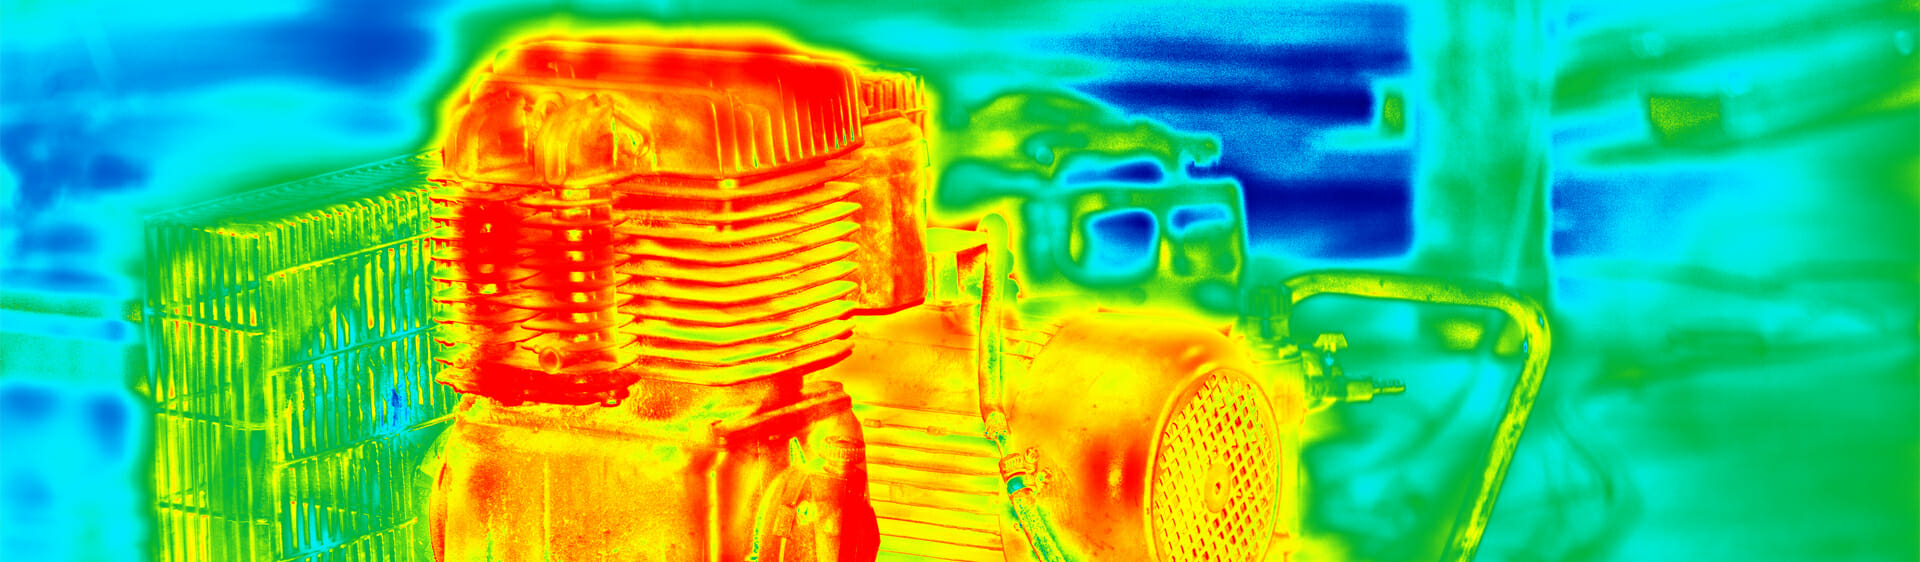 Motor Viewed Under Thermographic Imaging, Which Reveals Areas of Heat Concentration